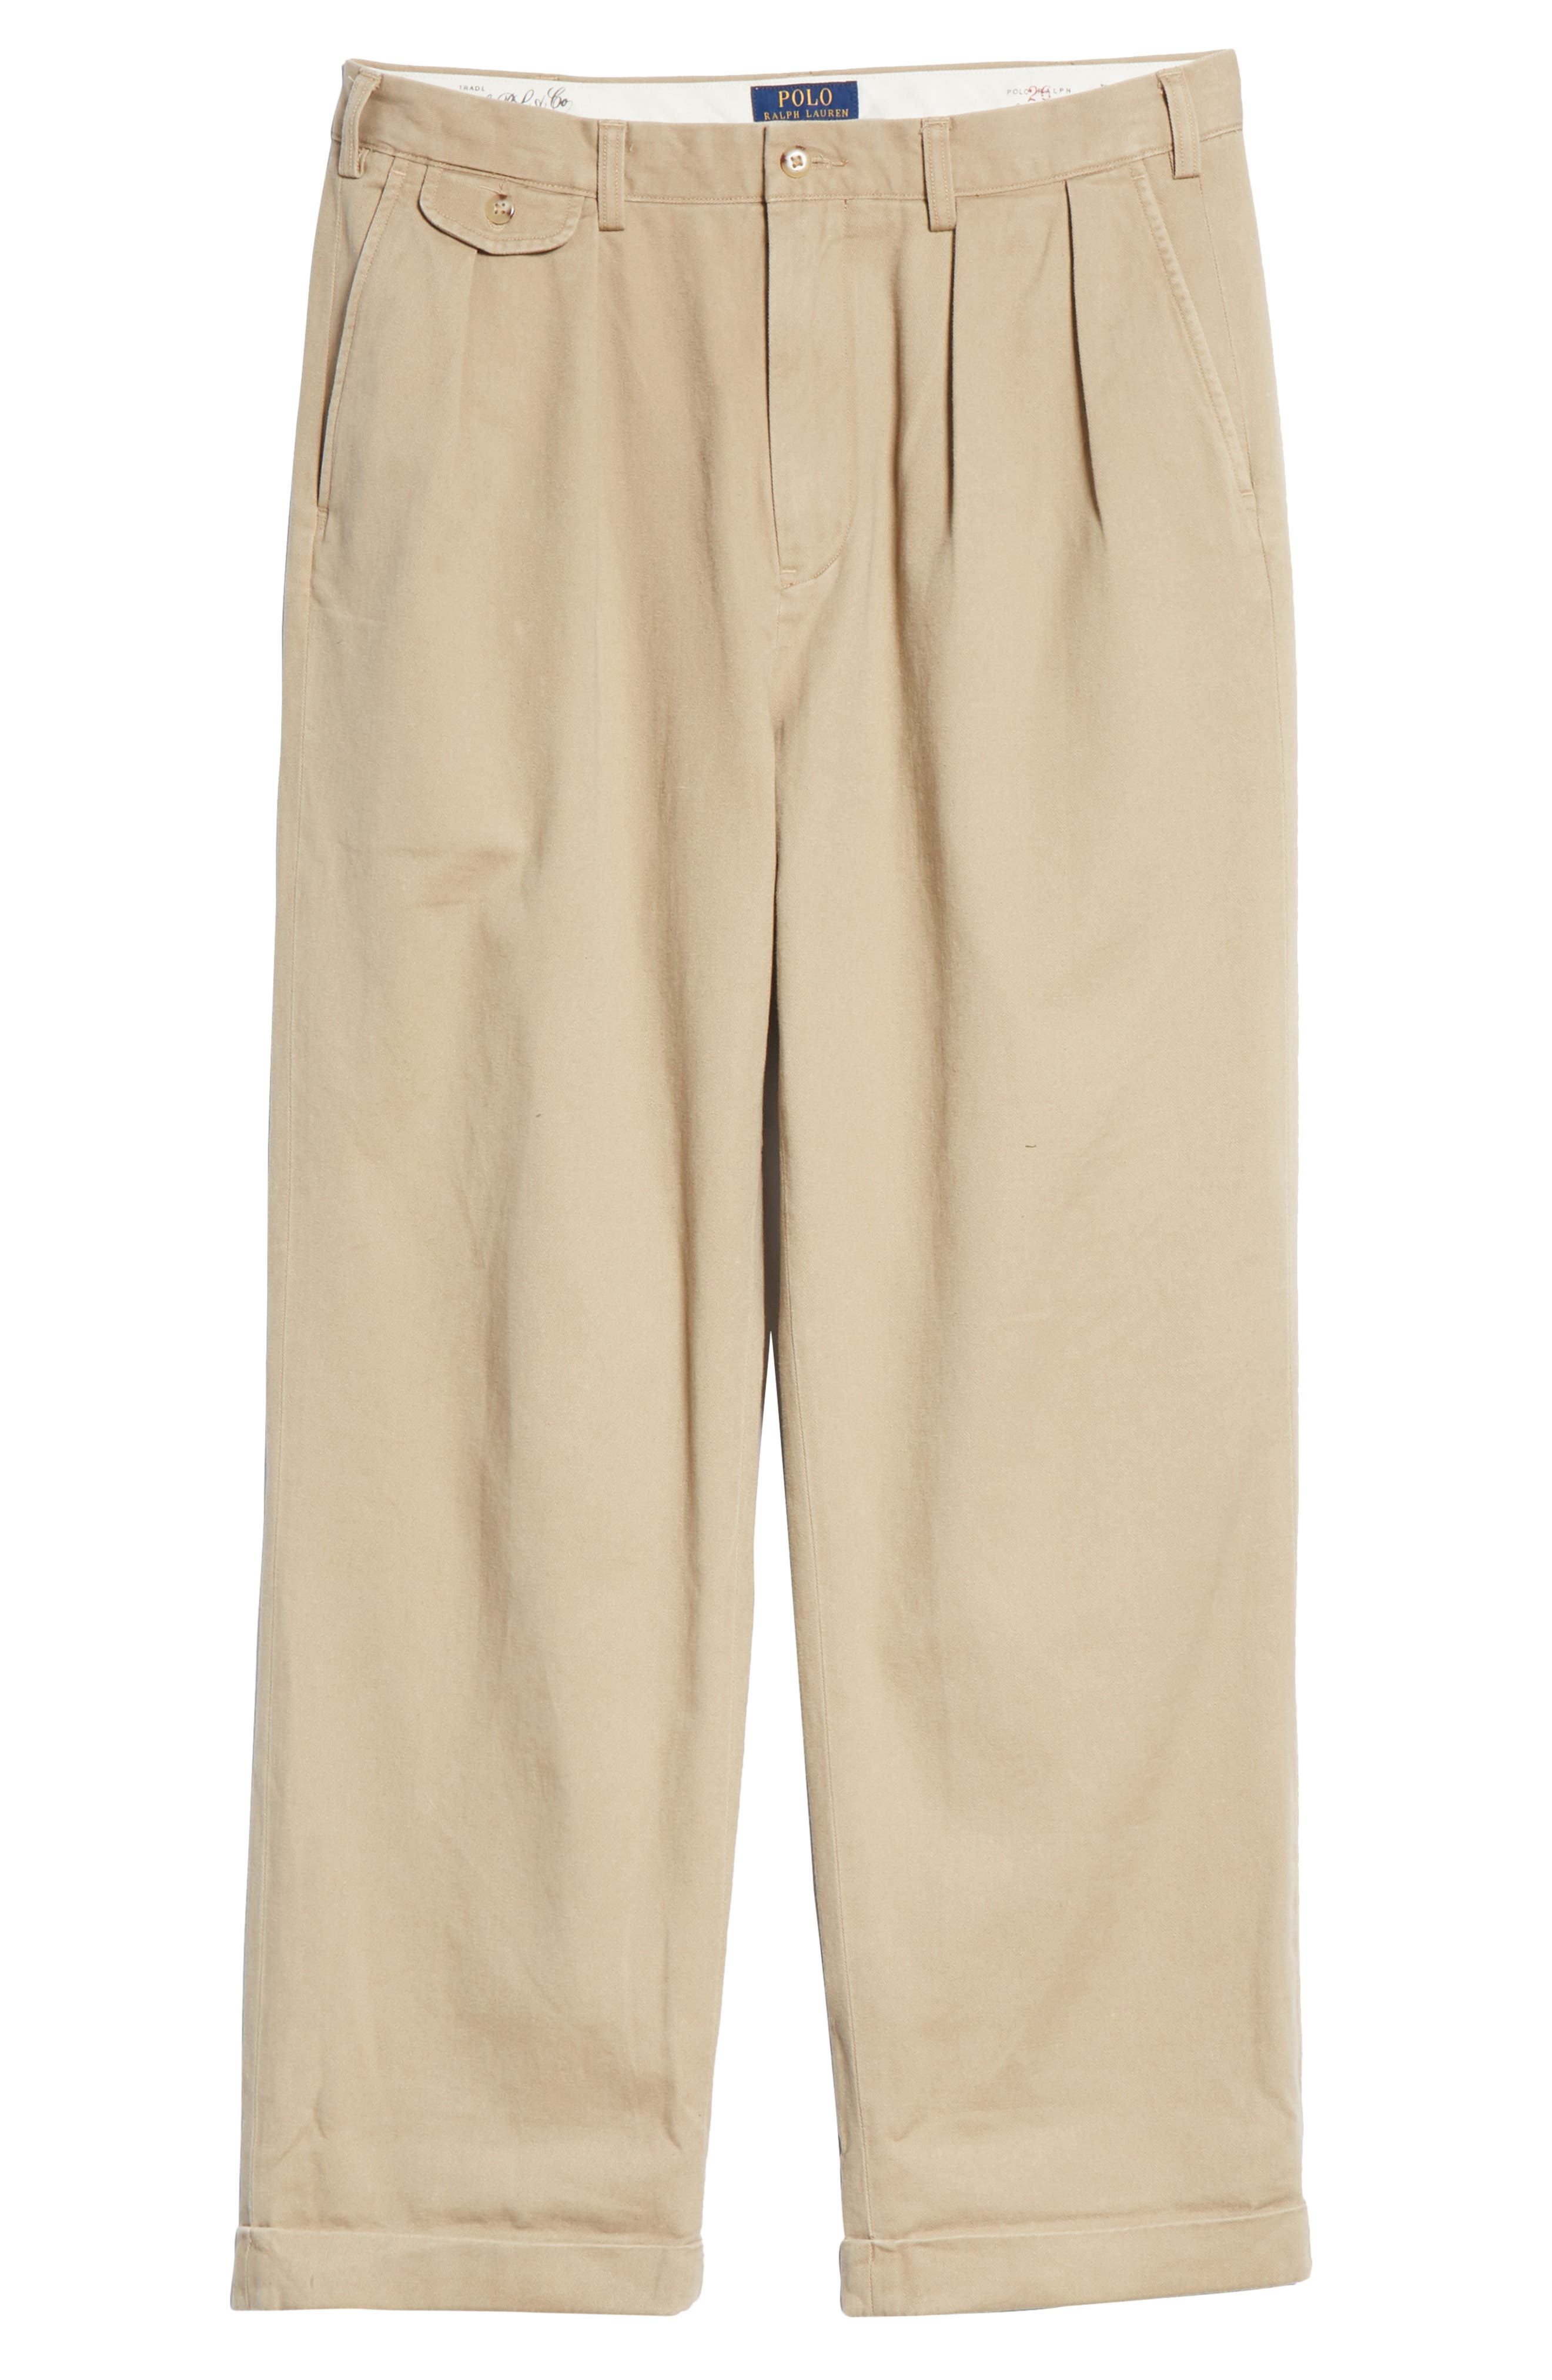 polo ralph lauren relaxed fit pleated chino